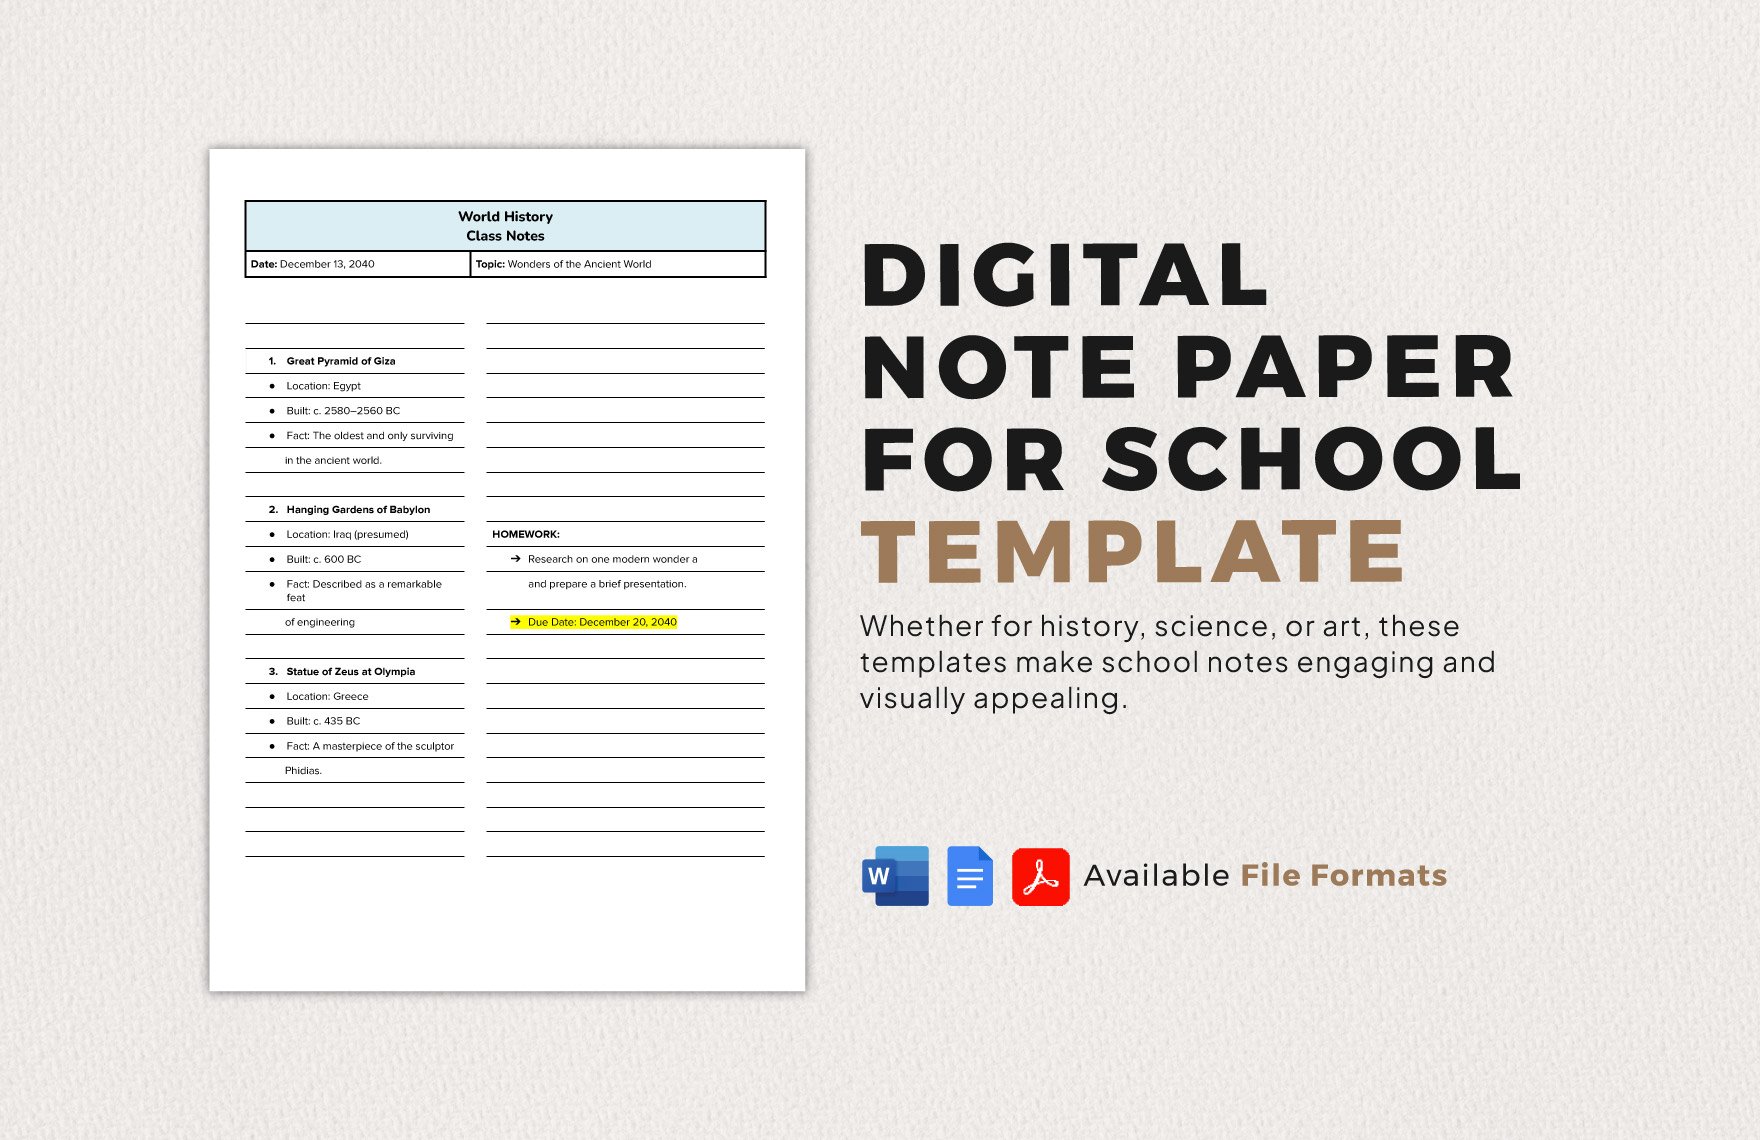 Digital Note Paper for School Template